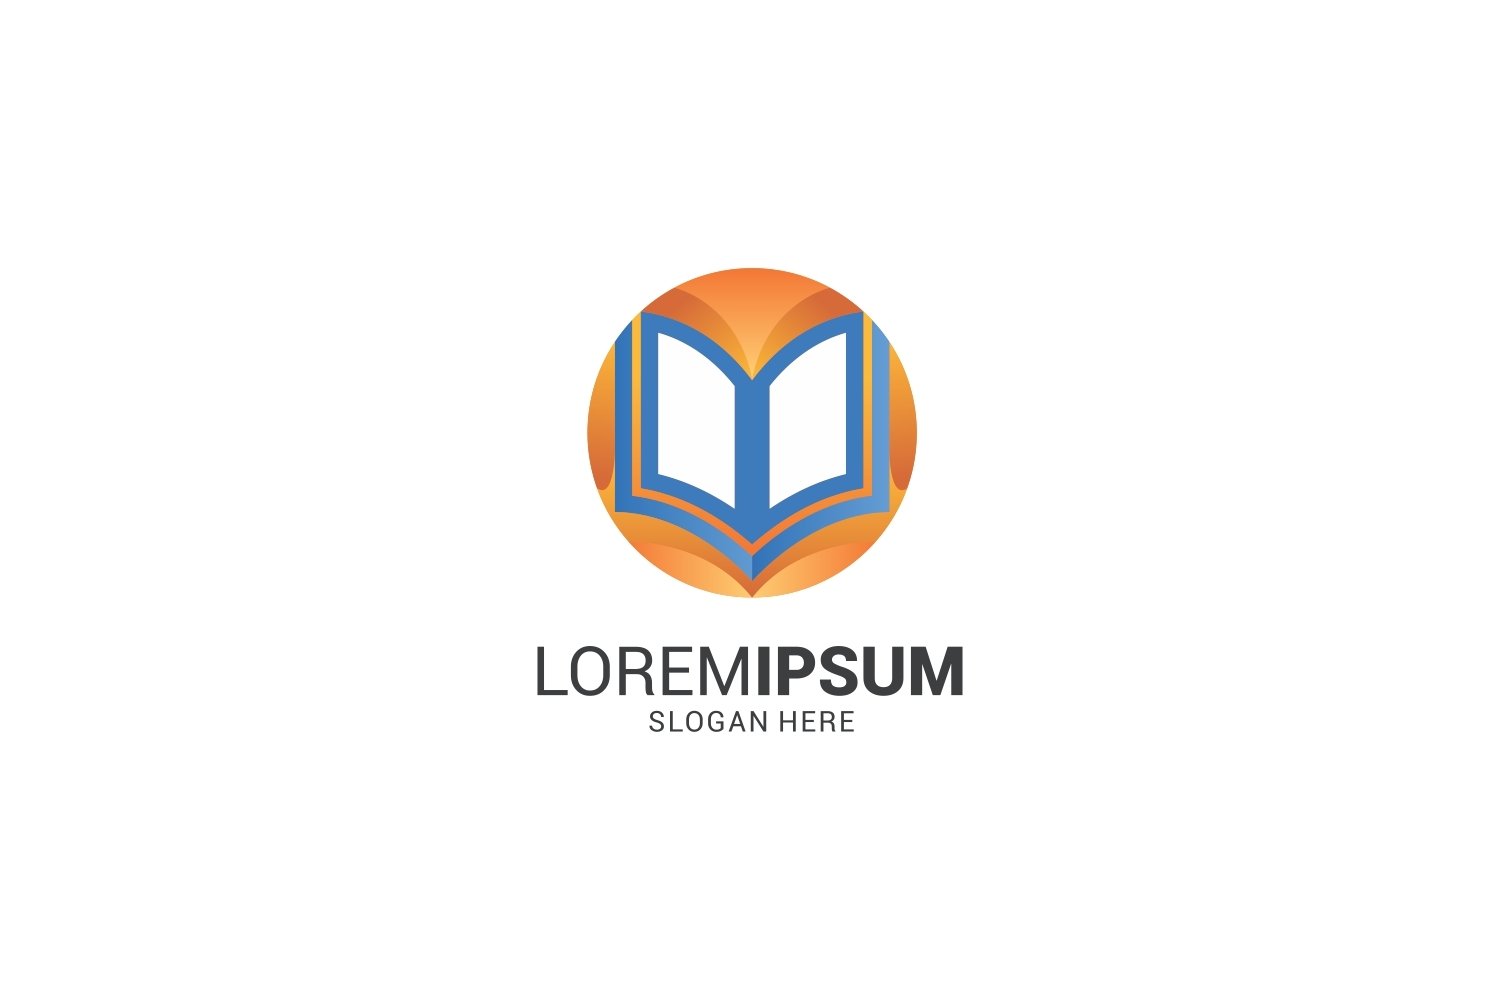 Pastel logo with an open book.